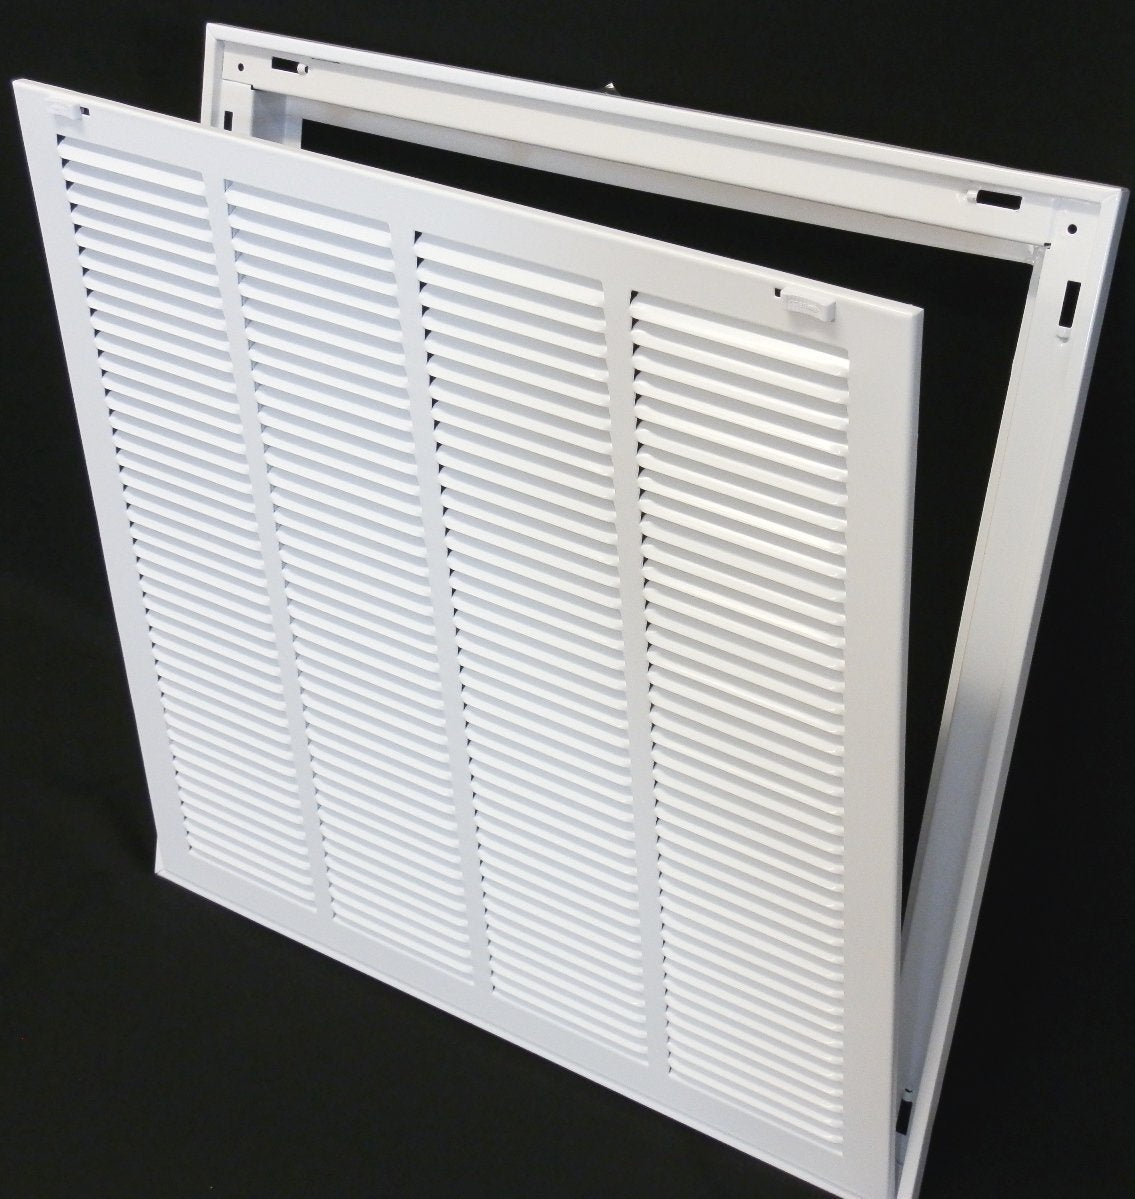 16&quot; X 18&quot; Steel Return Air Filter Grille for 1&quot; Filter - Removable Frame - [Outer Dimensions: 18 5/8&quot; X 20 5/8&quot;]